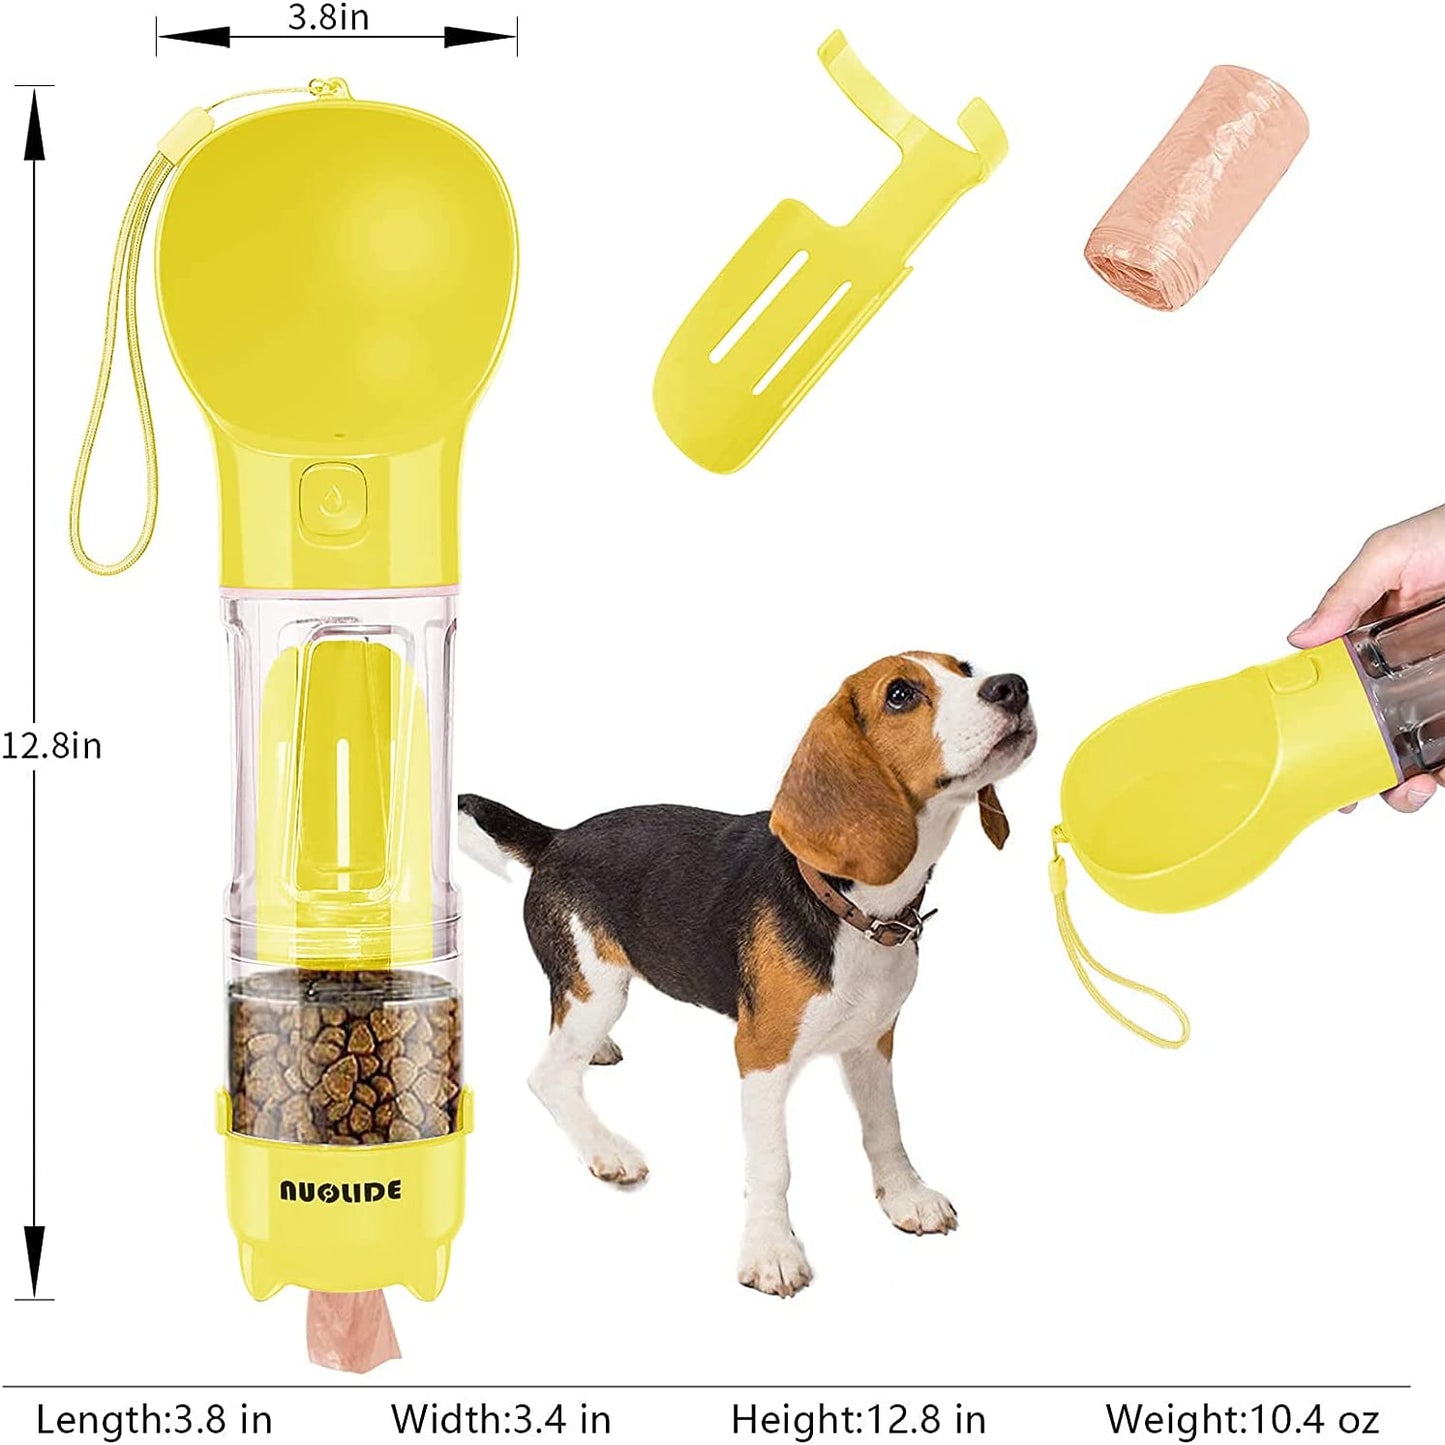 SELPONT G Water Bottles for Walking, 4 in 1 Portable Pet Water Bottle Dispenser Leakproof Dog Travel Water Bottle with Food Container & Waste Bag, Dog Accessories for Outdoor Hiking (Yellow)